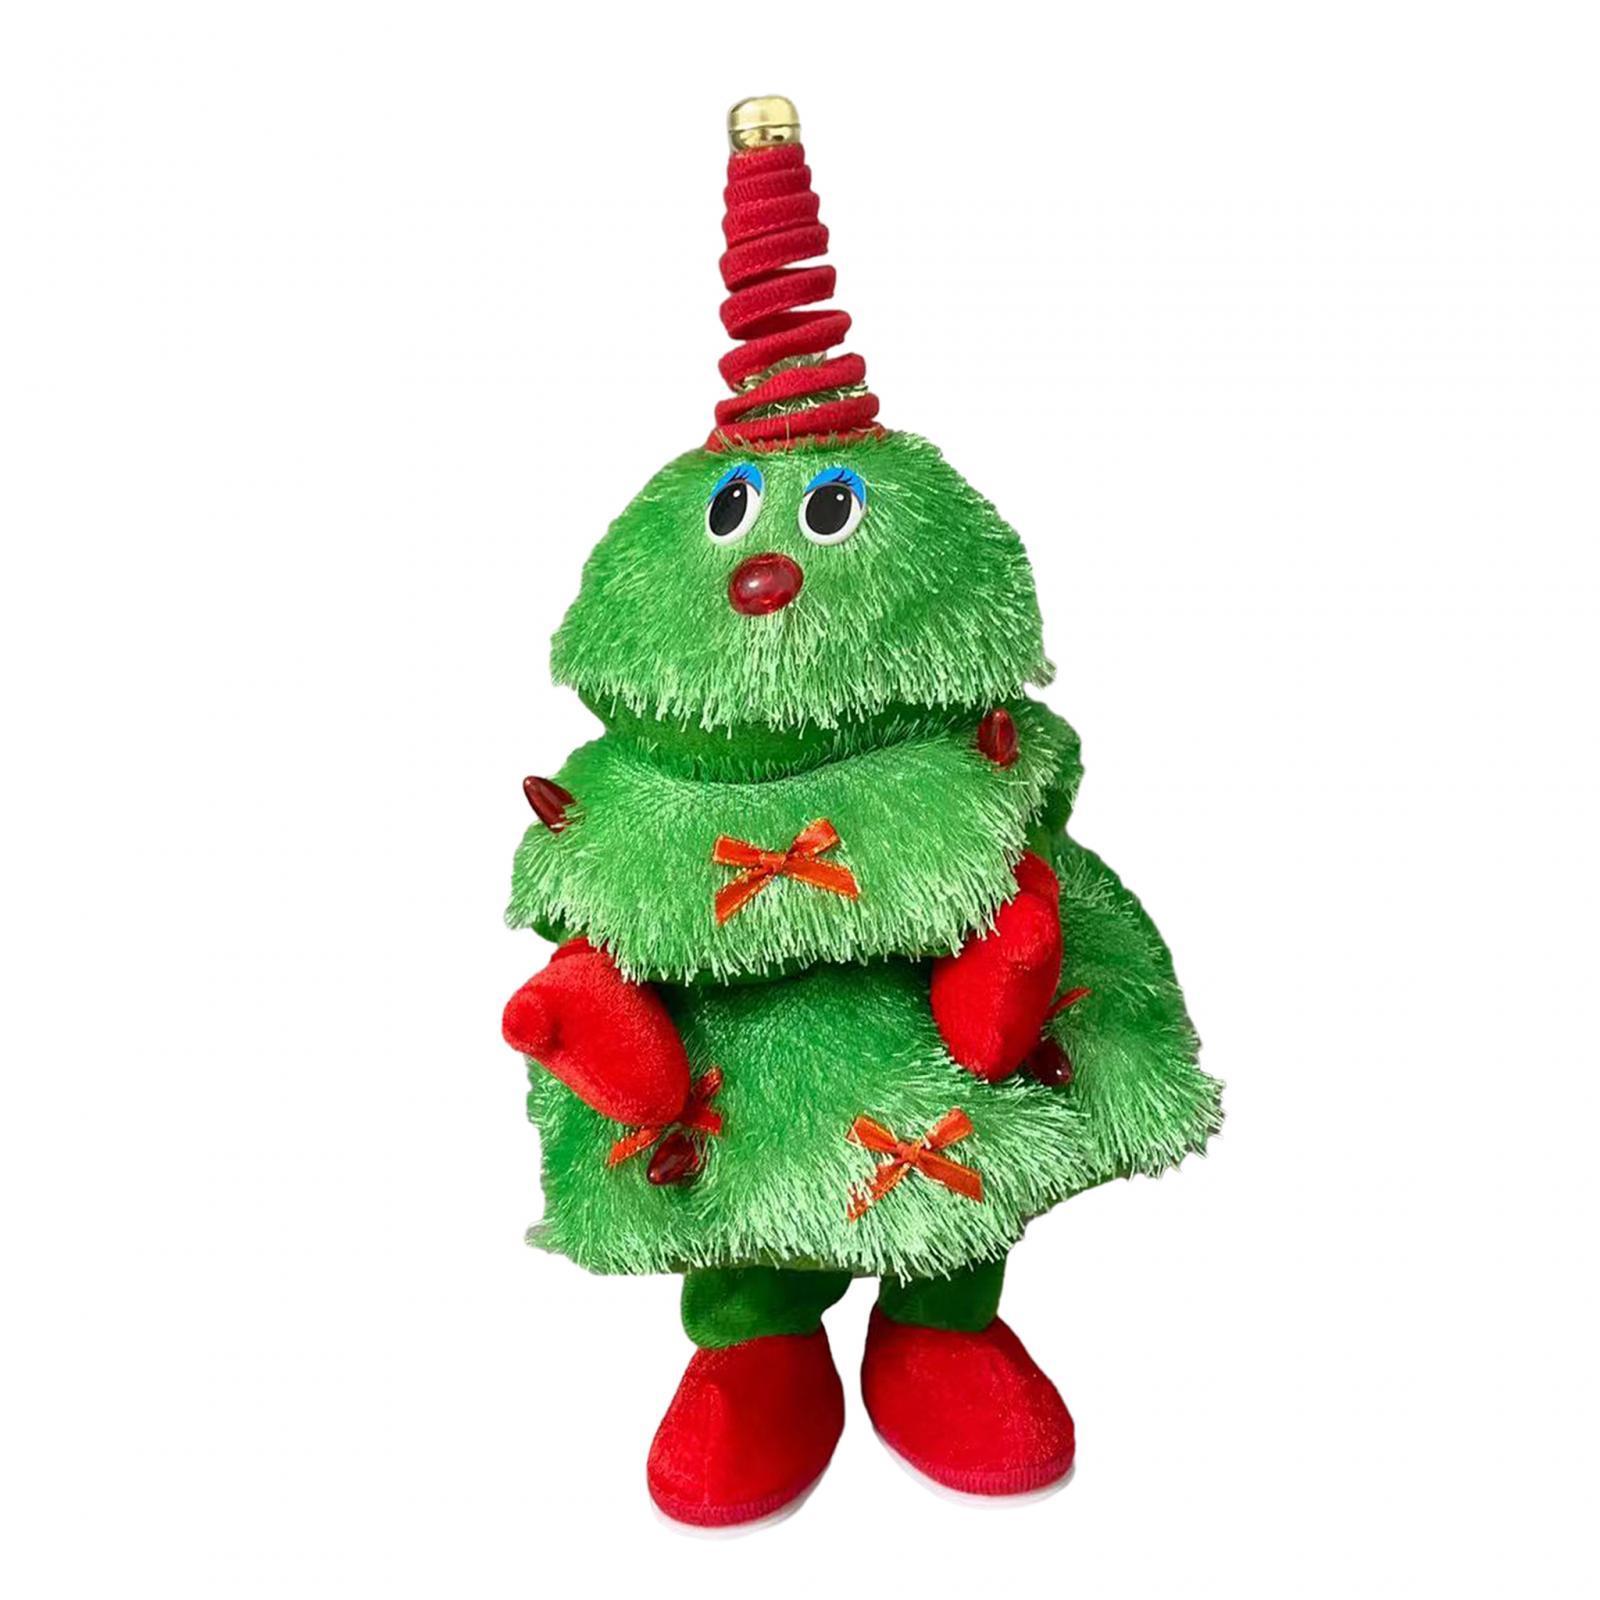 Christmas Electric Plush Dancing Plush Toy for Living Room Party Decorations